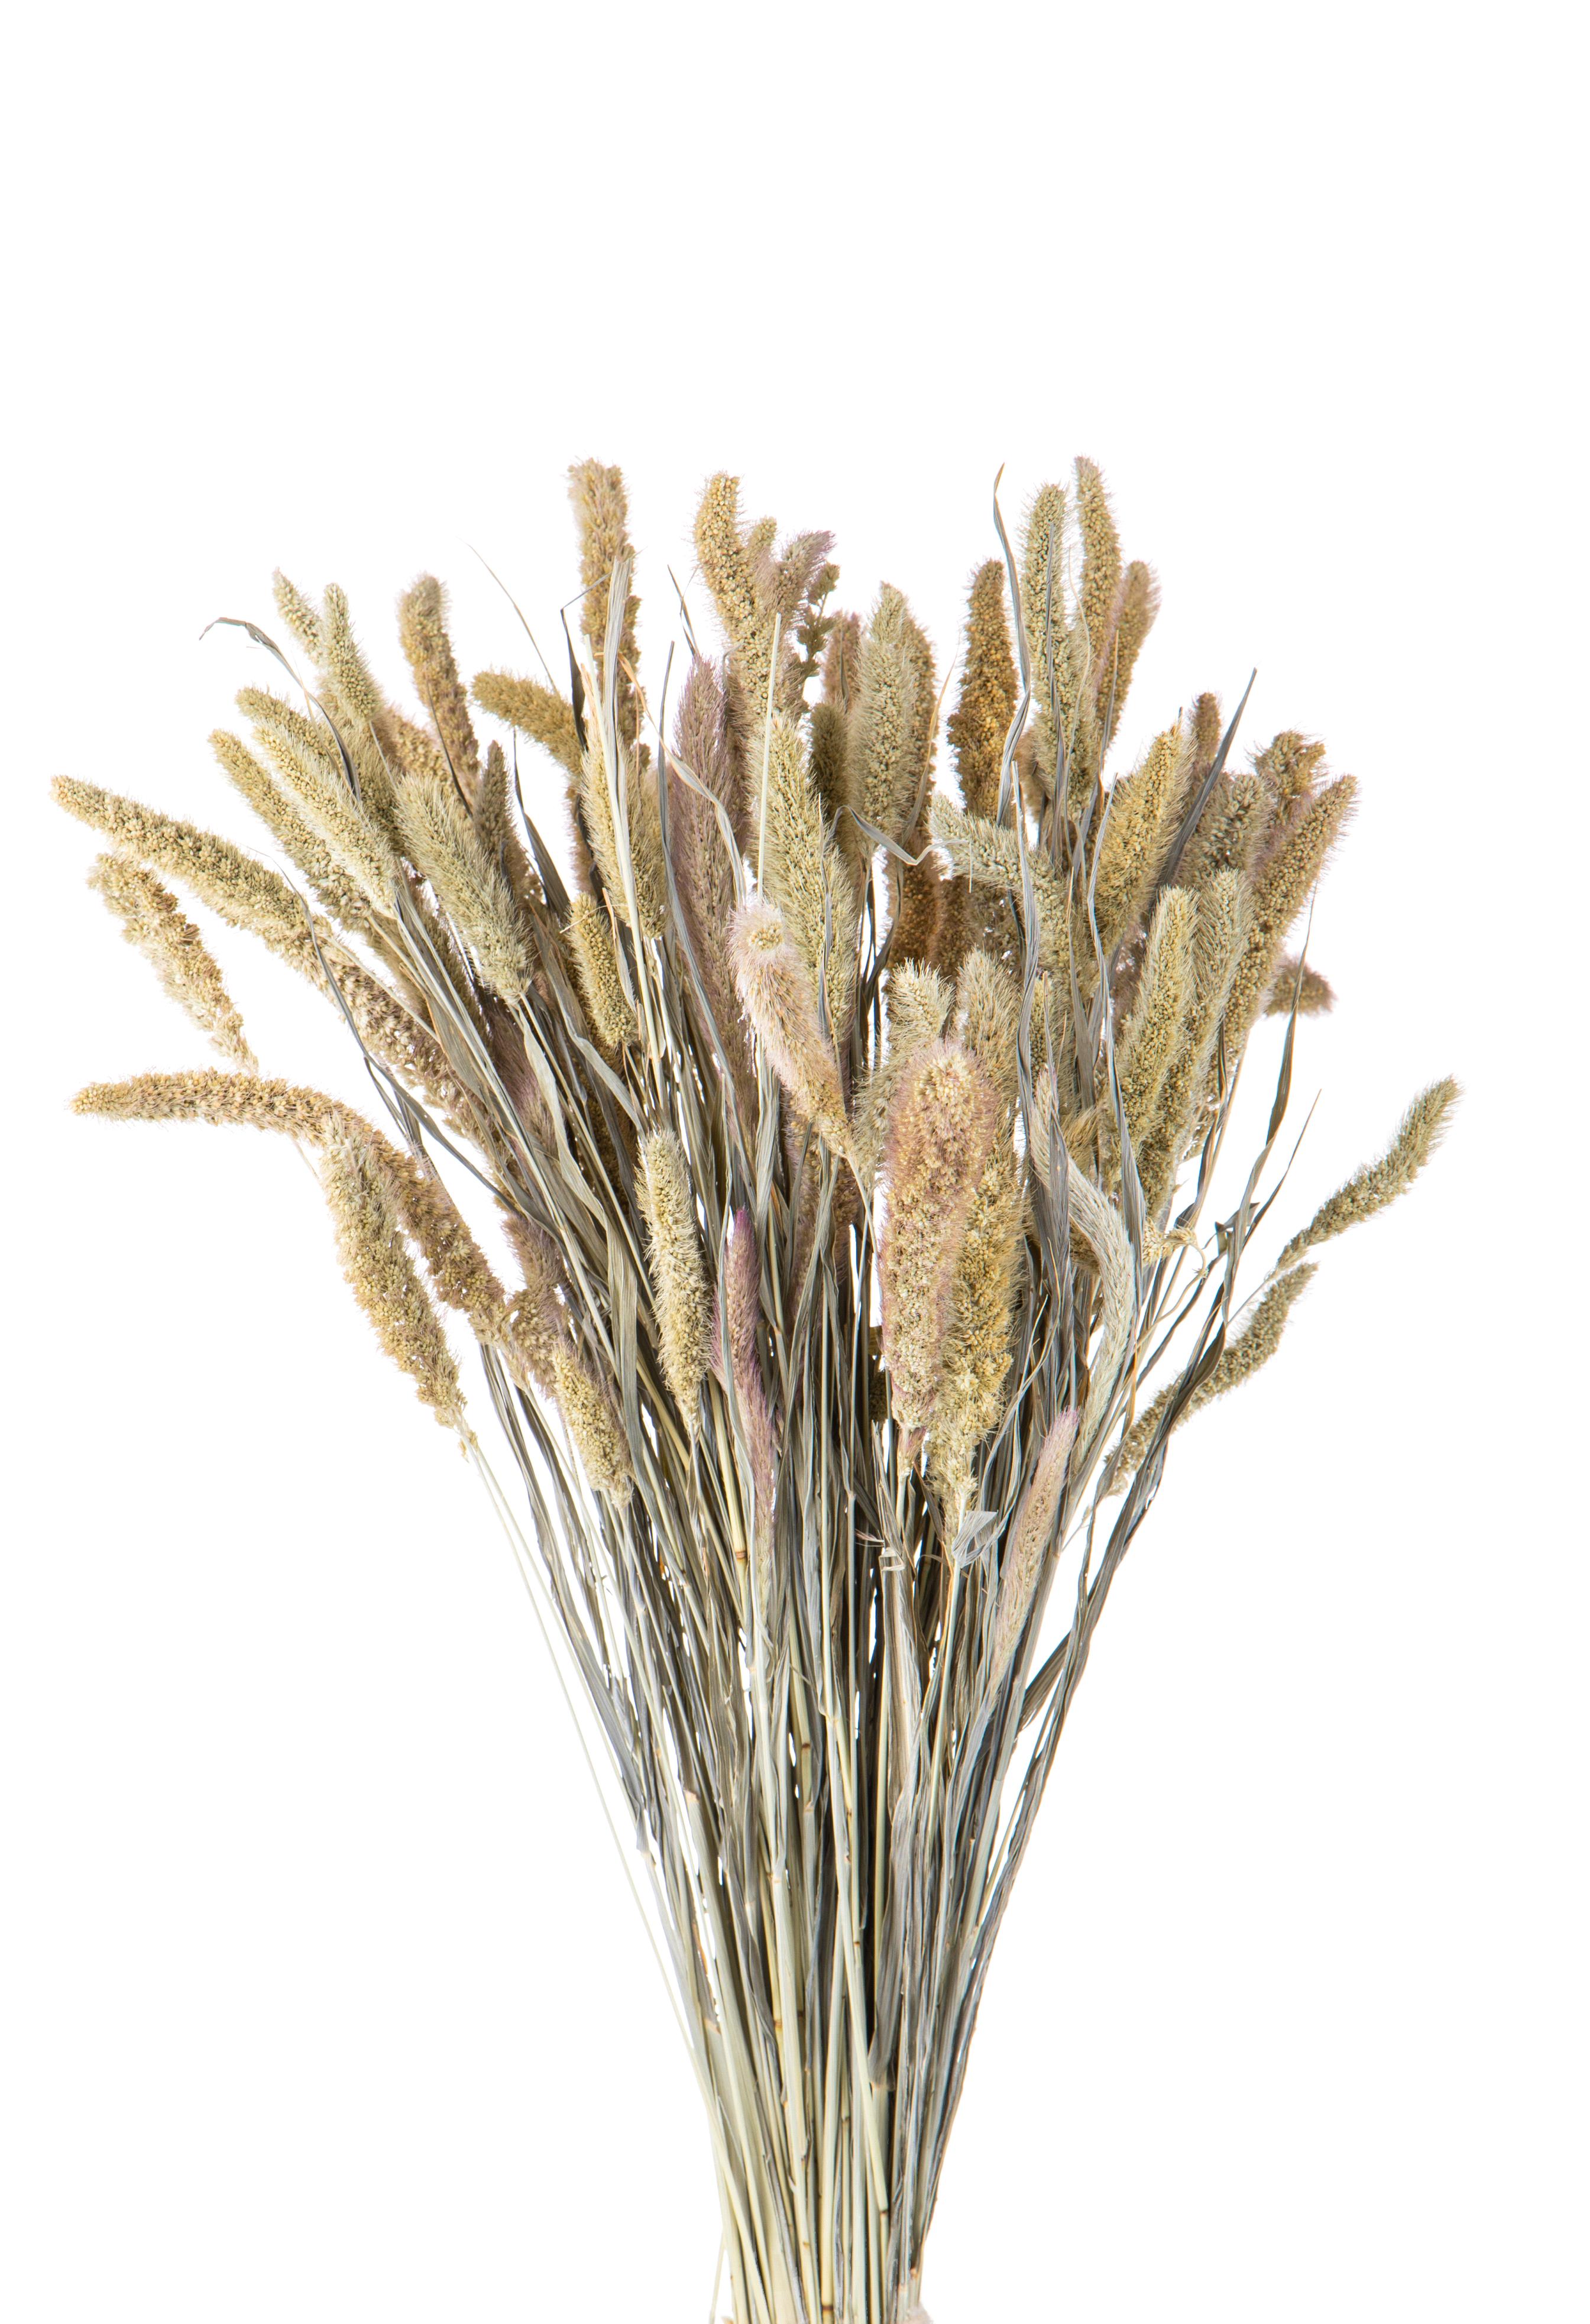 NATURAL PRODUCTS DRIED FLOWERS AND ERBS,SETARIA SERTICILLATA NAT. A KG.